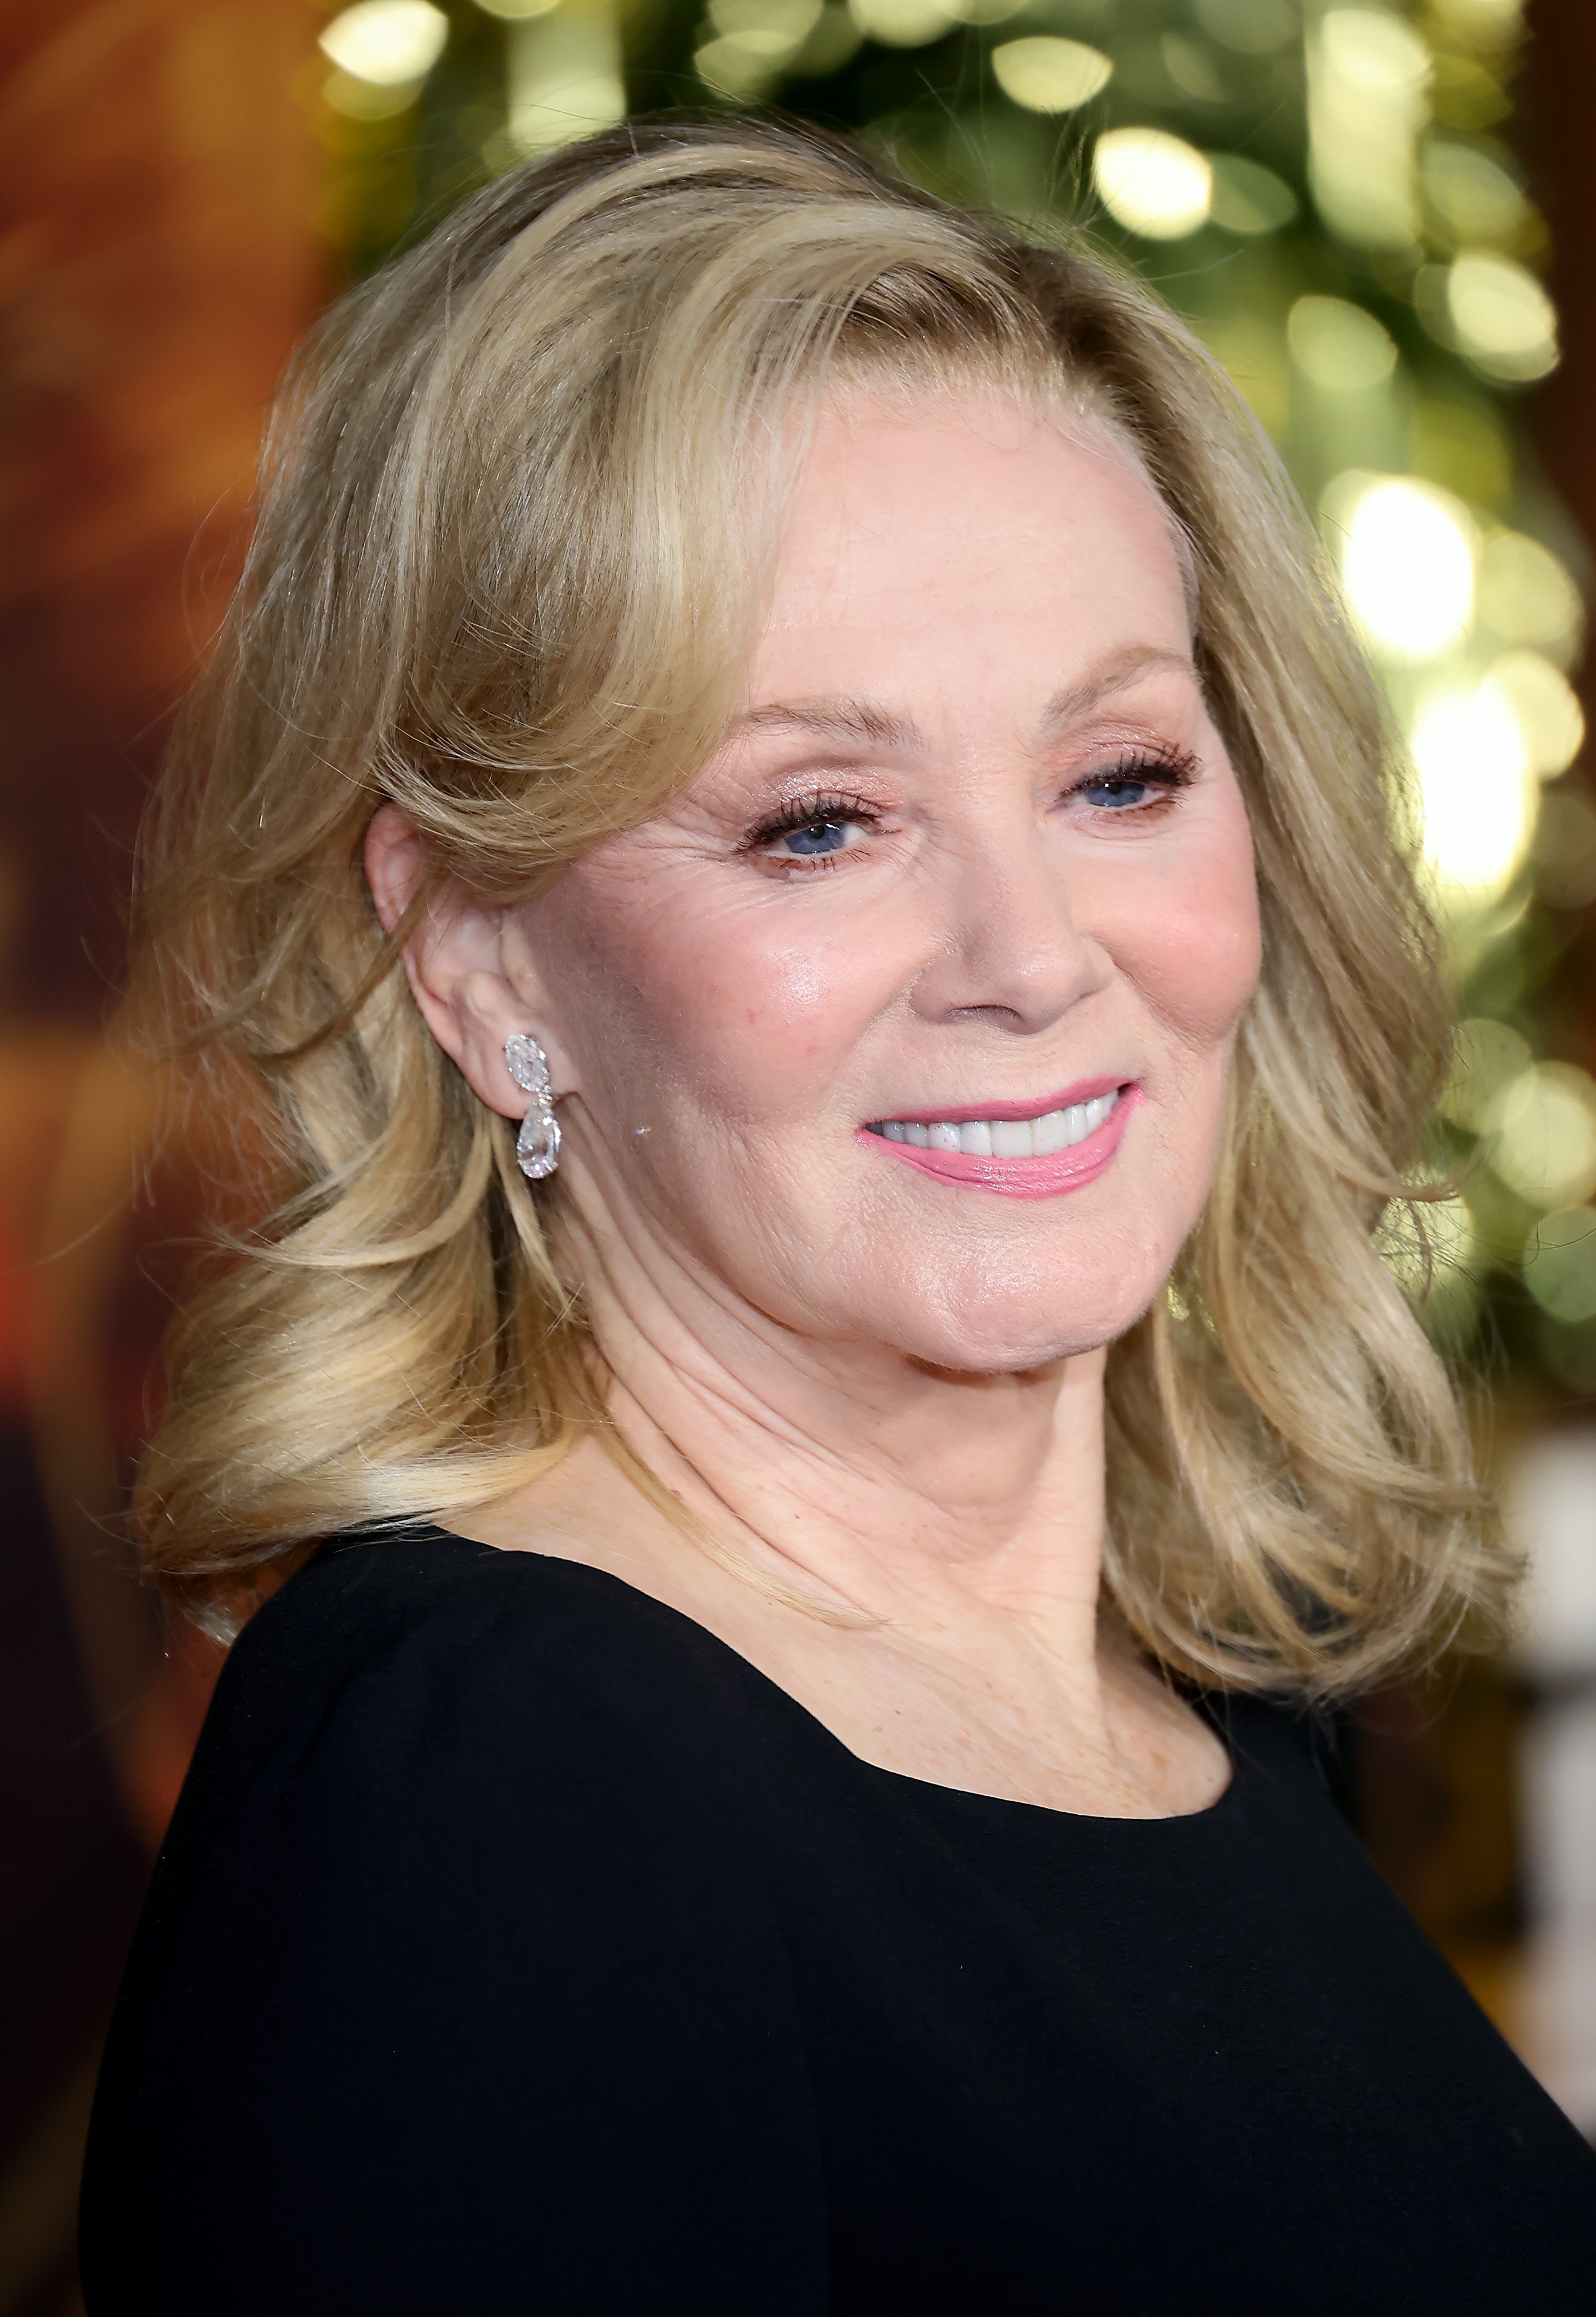 Jean Smart attends the Global Premiere Screening of "Babylon" at Academy Museum of Motion Pictures on December 15, 2022 in Los Angeles, California. | Source: Getty Images